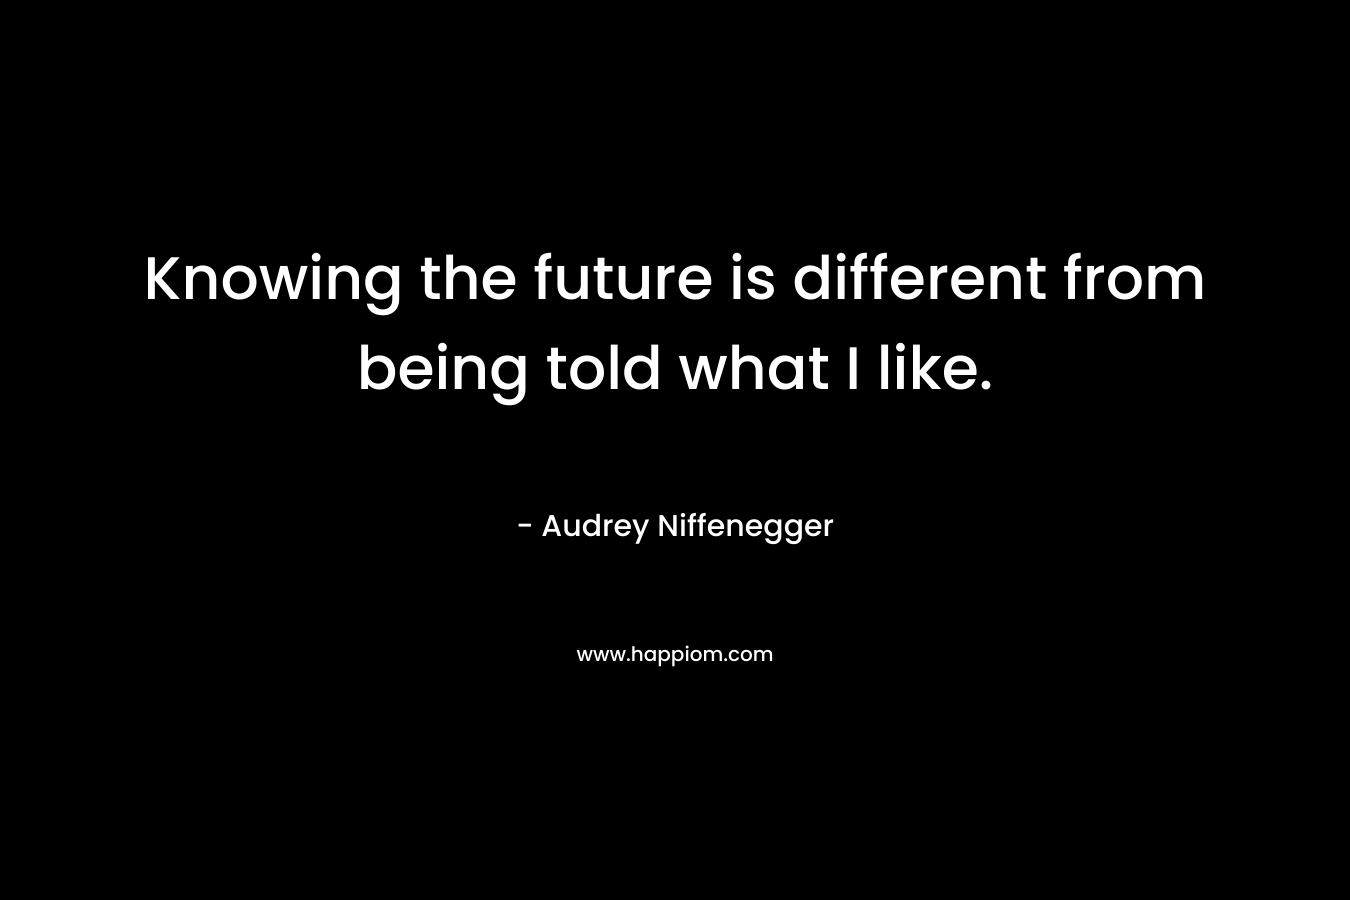 Knowing the future is different from being told what I like.